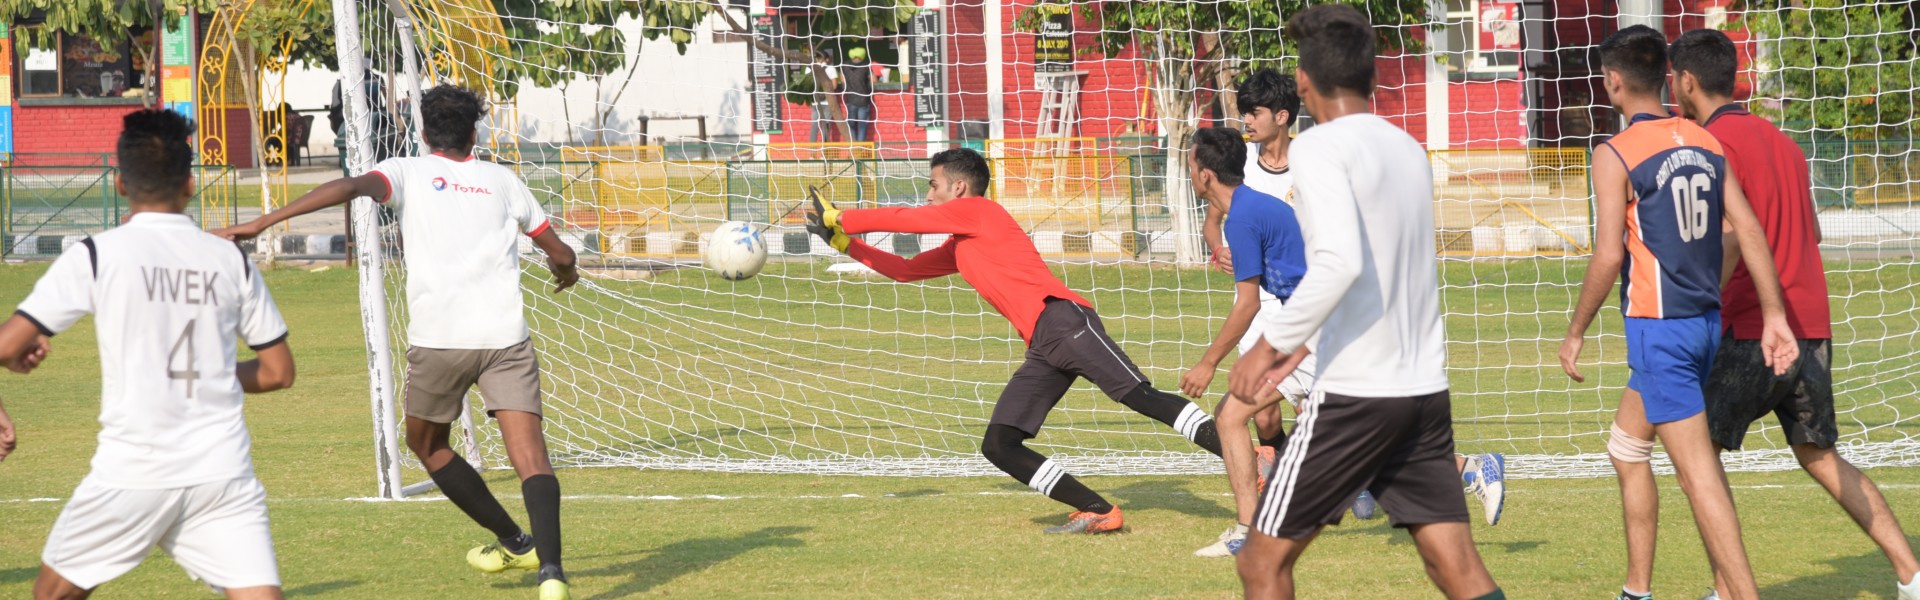 The Inter Department Football Tournament kick-started today at the campus with sheer zeal! 